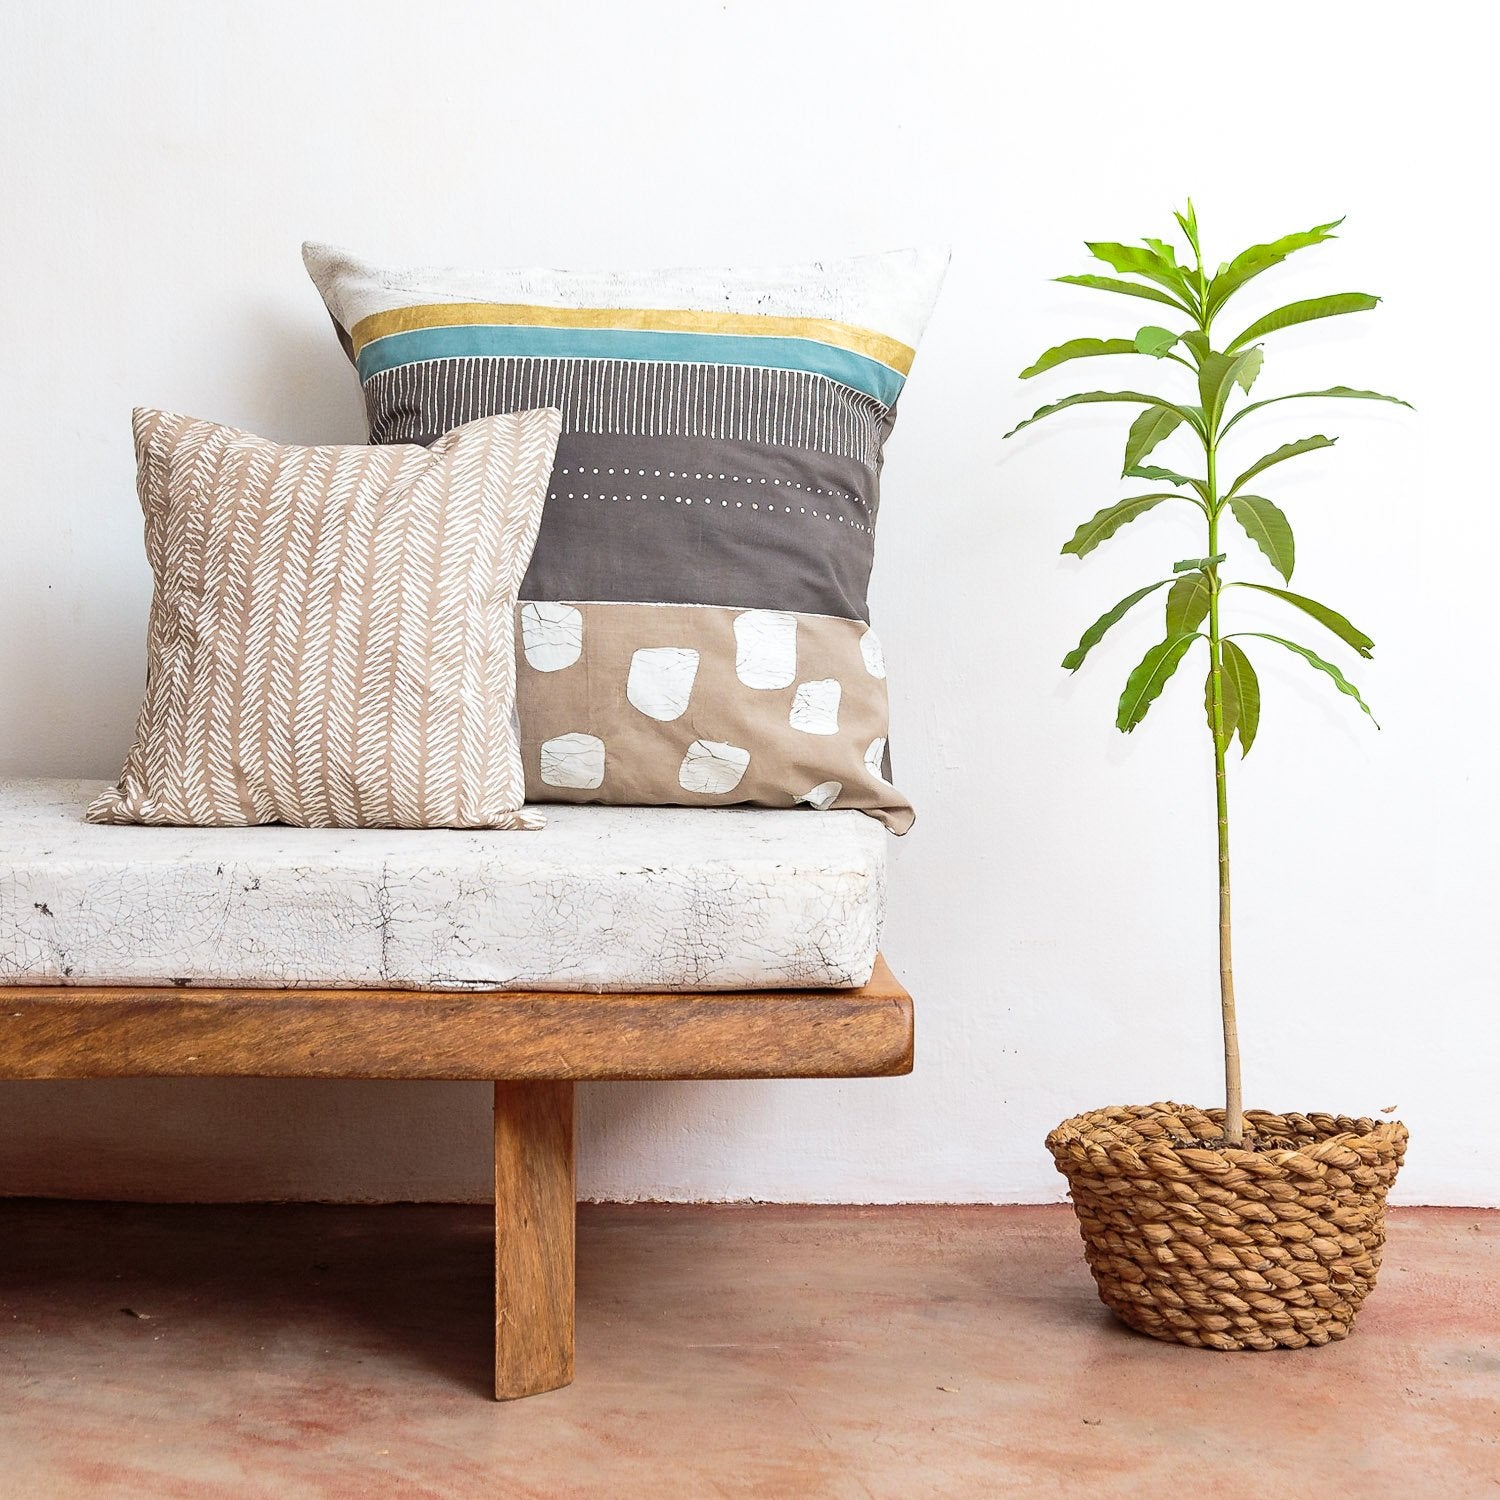 Tribal-inspired Multiprint Cushions for stylish living